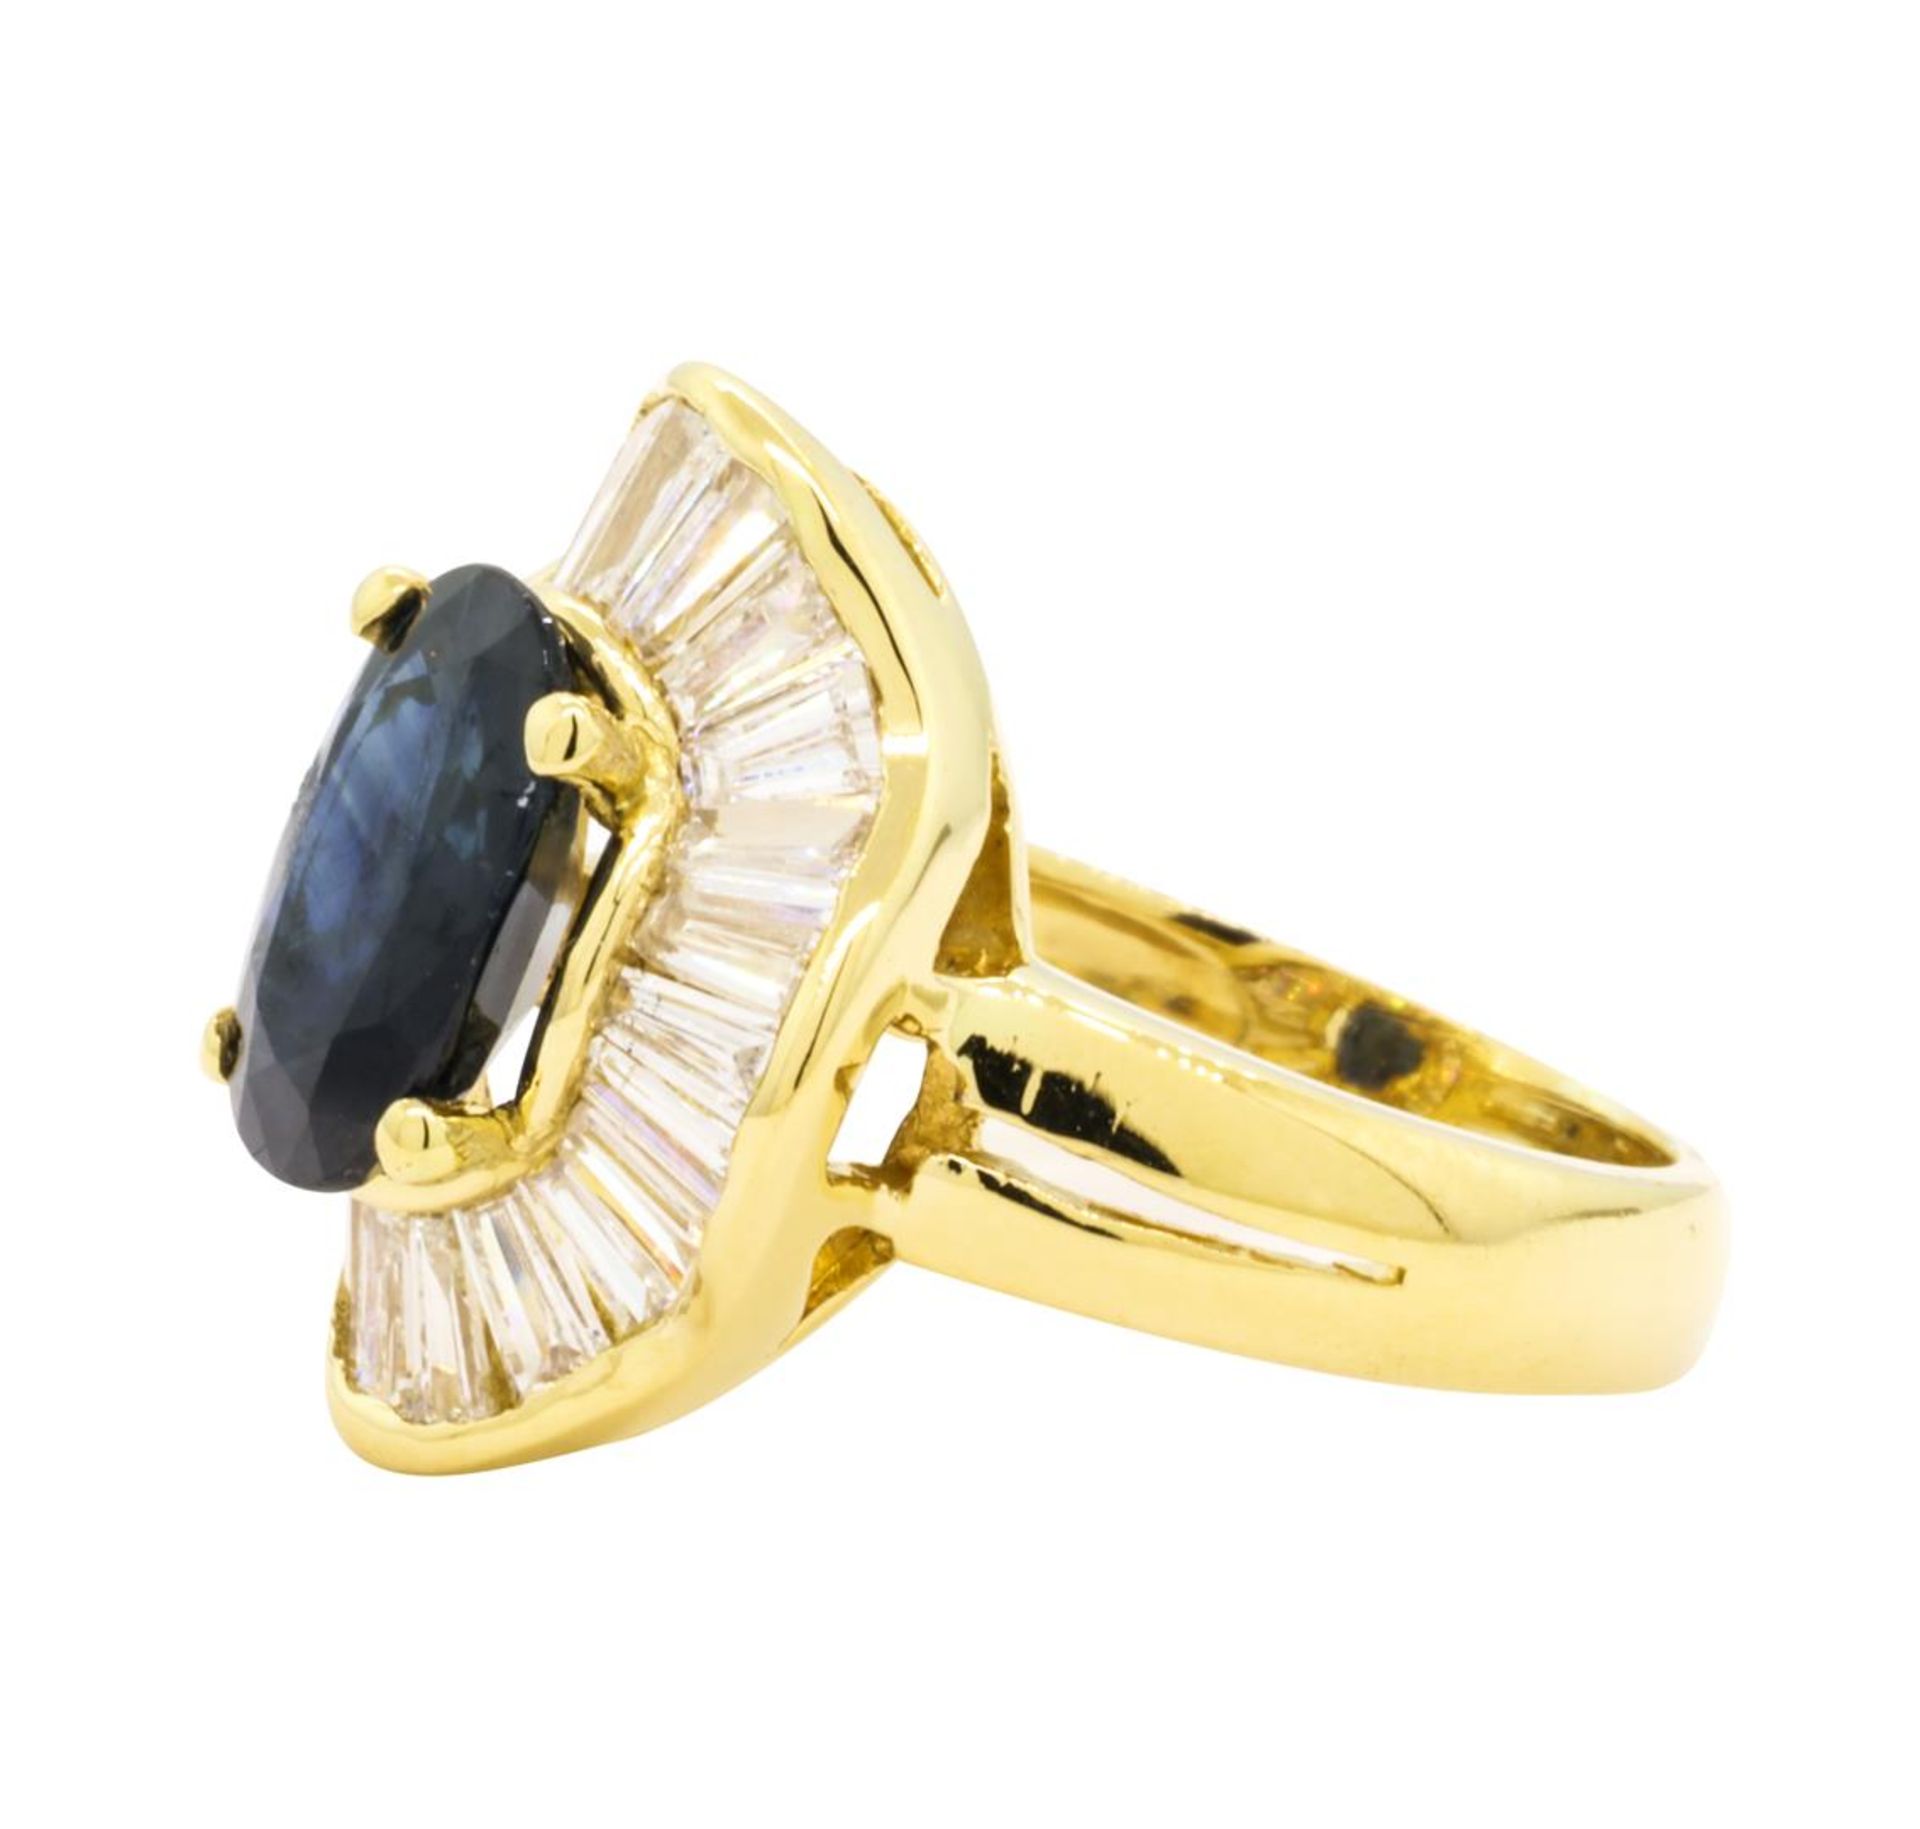 2.90 ctw Sapphire and Diamond Ring - 18KT Yellow Gold - Image 2 of 5